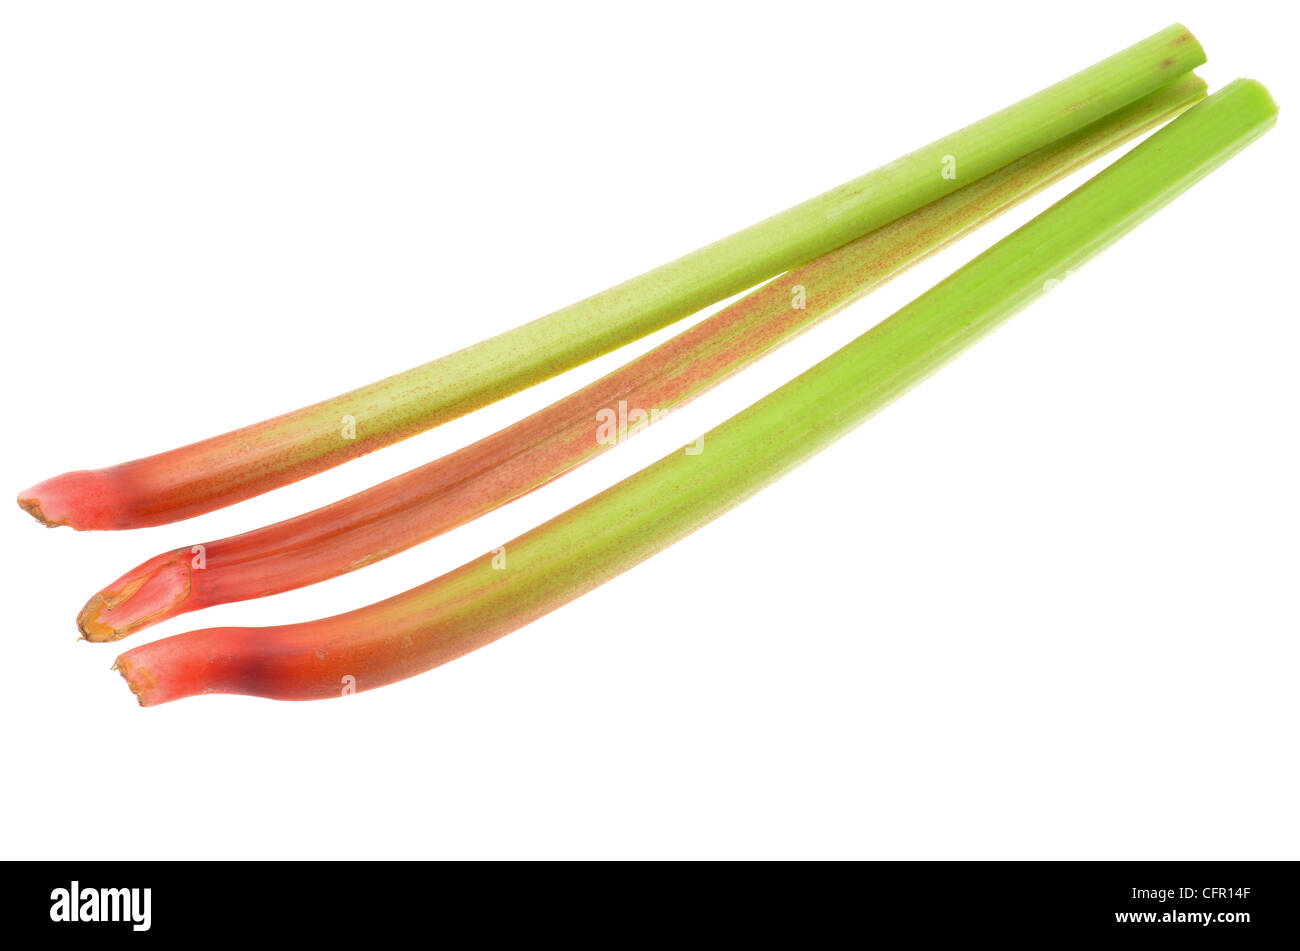 Fresh stalks of Rhubarb also known as Pieplant taken in the studio with a high key white background Stock Photo